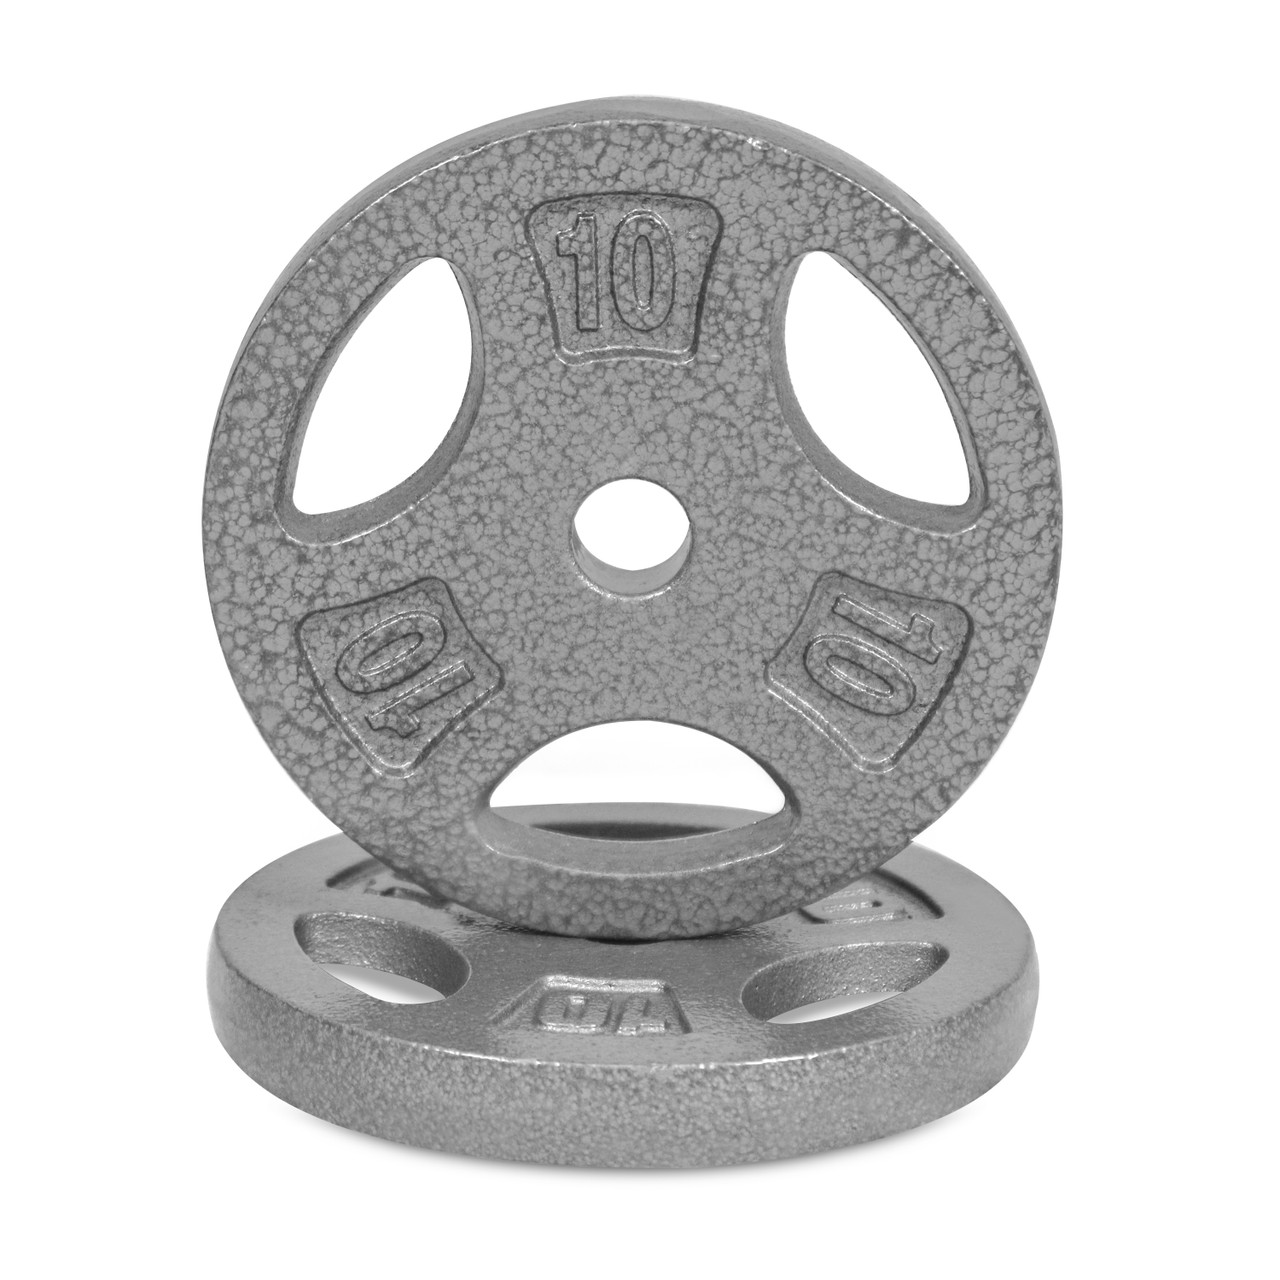 CAP Barbell Cast Iron 1-Inch Standard Grip Plate for Strength Training,  Muscle Toning, Weight Loss & Crossfit - Grey - WF Athletic Supply